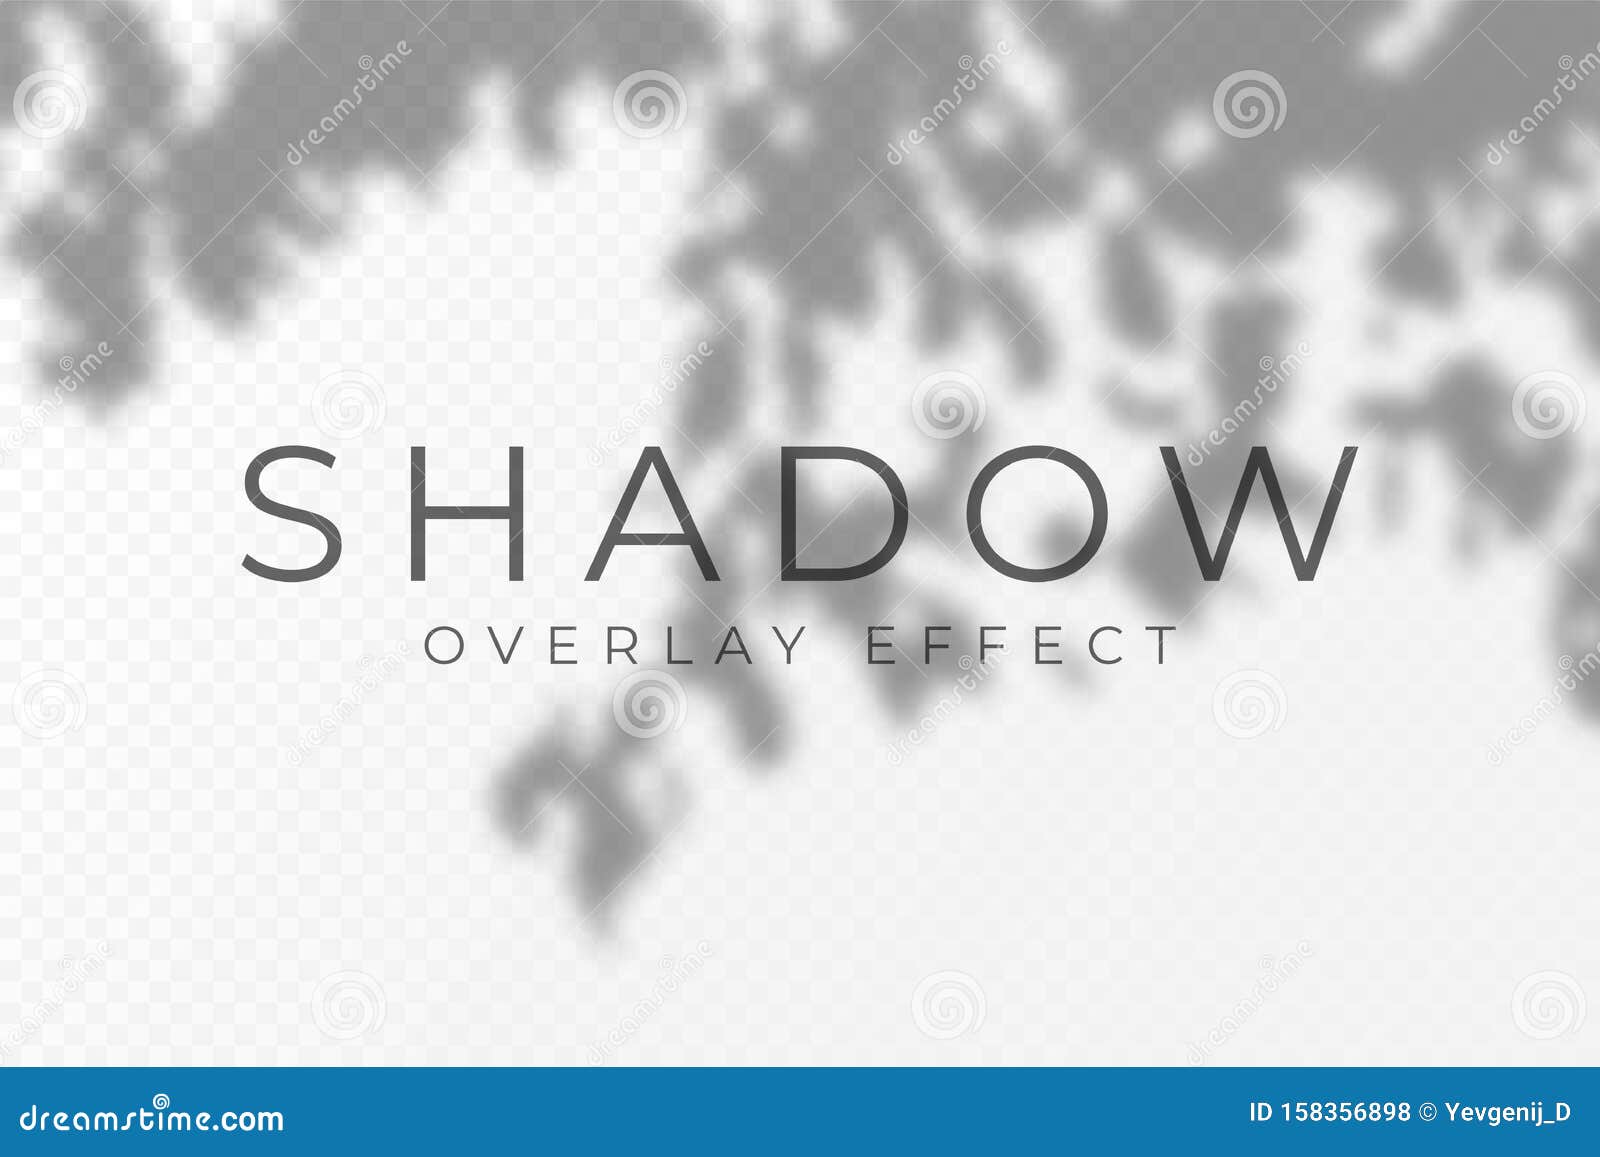 shadow overlay effect. transparent soft light and shadows from plant branches, leaves and foliage